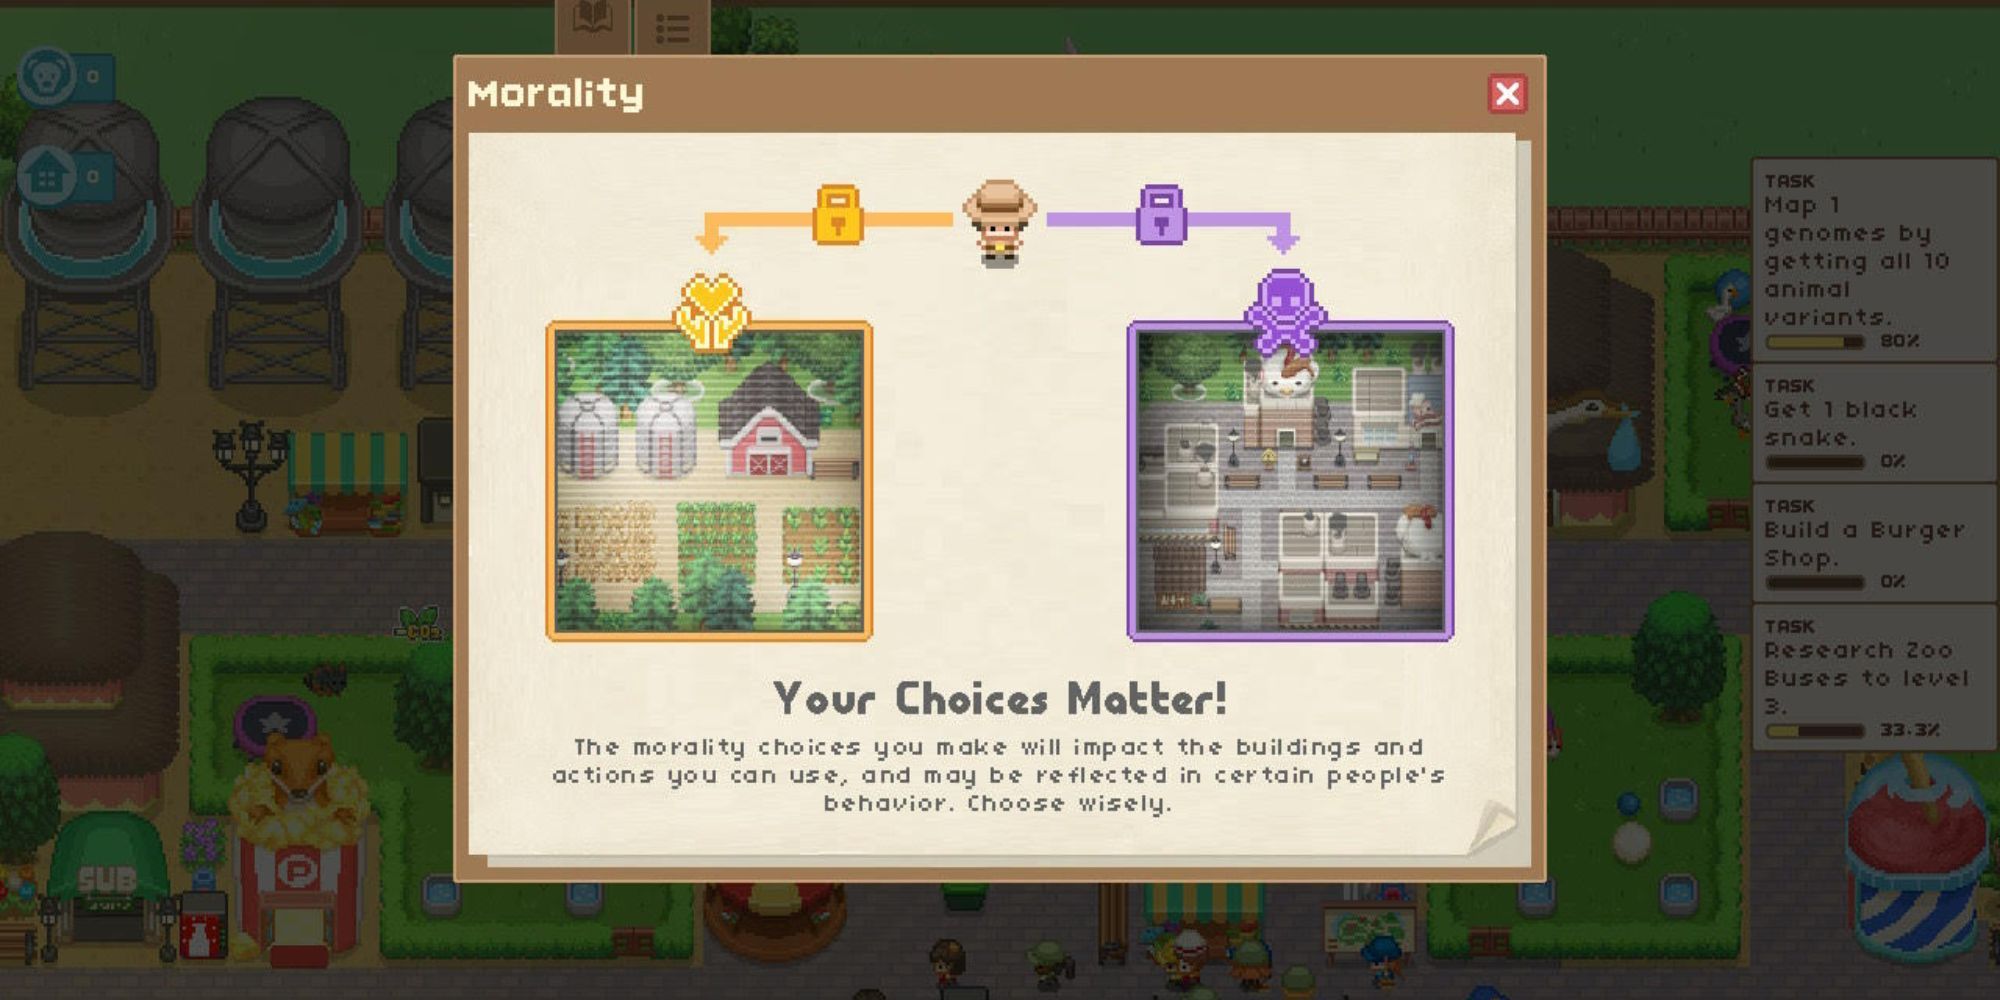 The Morality tutorial in Let's Build A Zoo